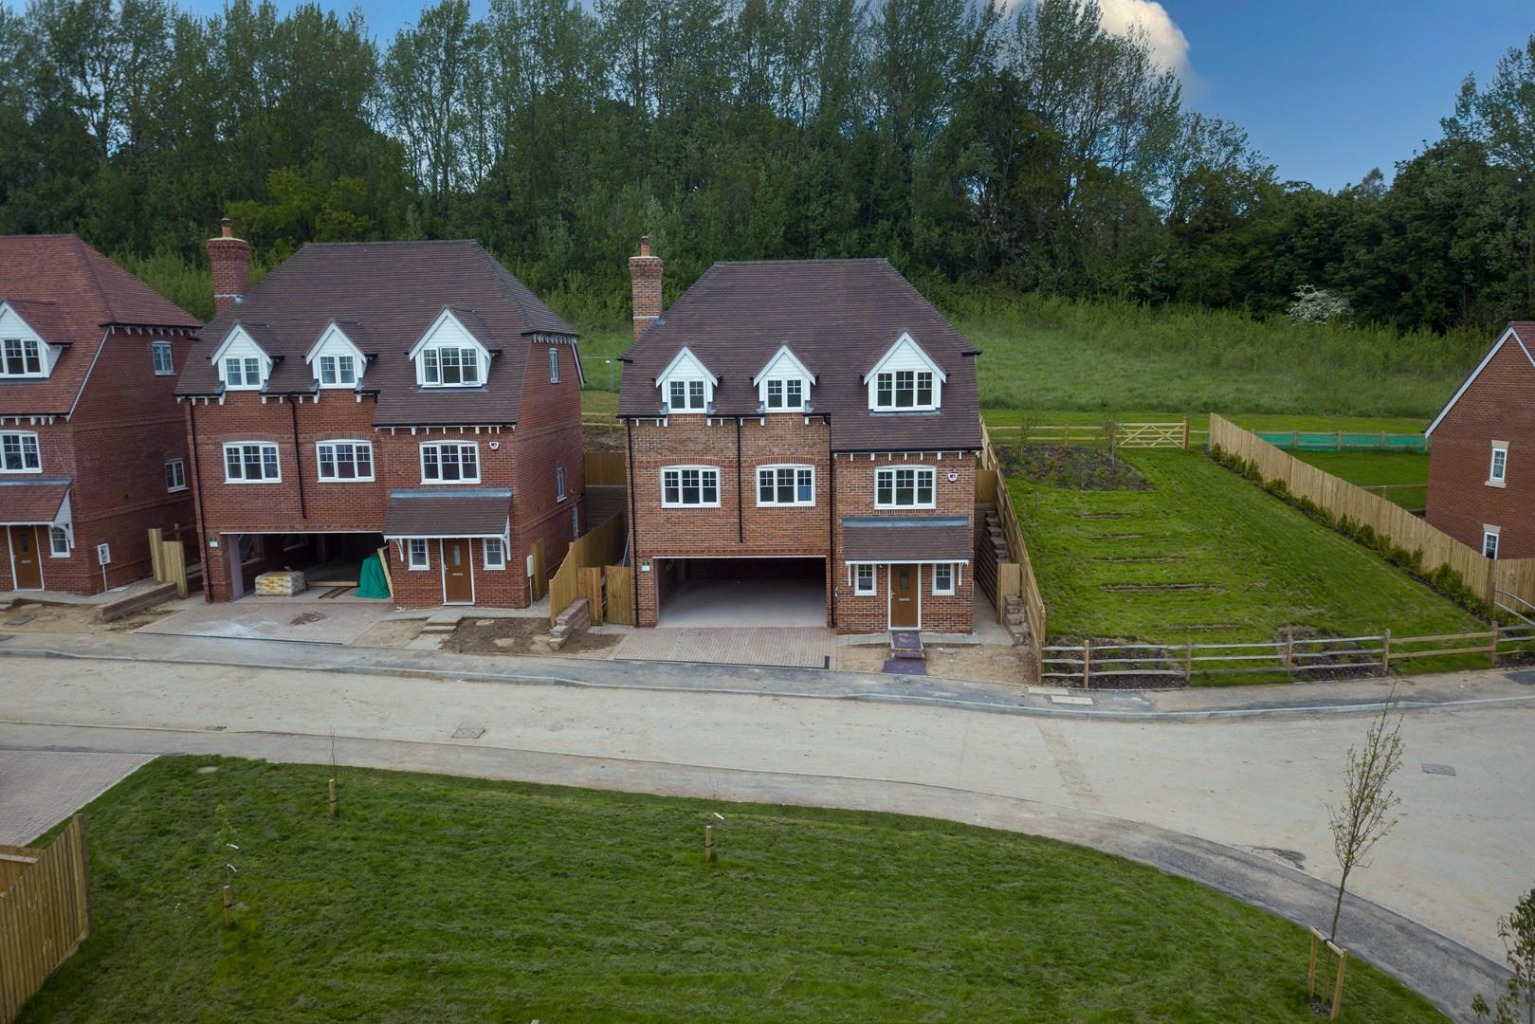 *Marketed by Andy Meade* A stunning 4 bedroom detached house built to Westbuild Homes Sussex Design on the delightful Reed Gardens Development situated in the West Berkshire countryside village of Woolhampton. Contact Andy For a viewing .